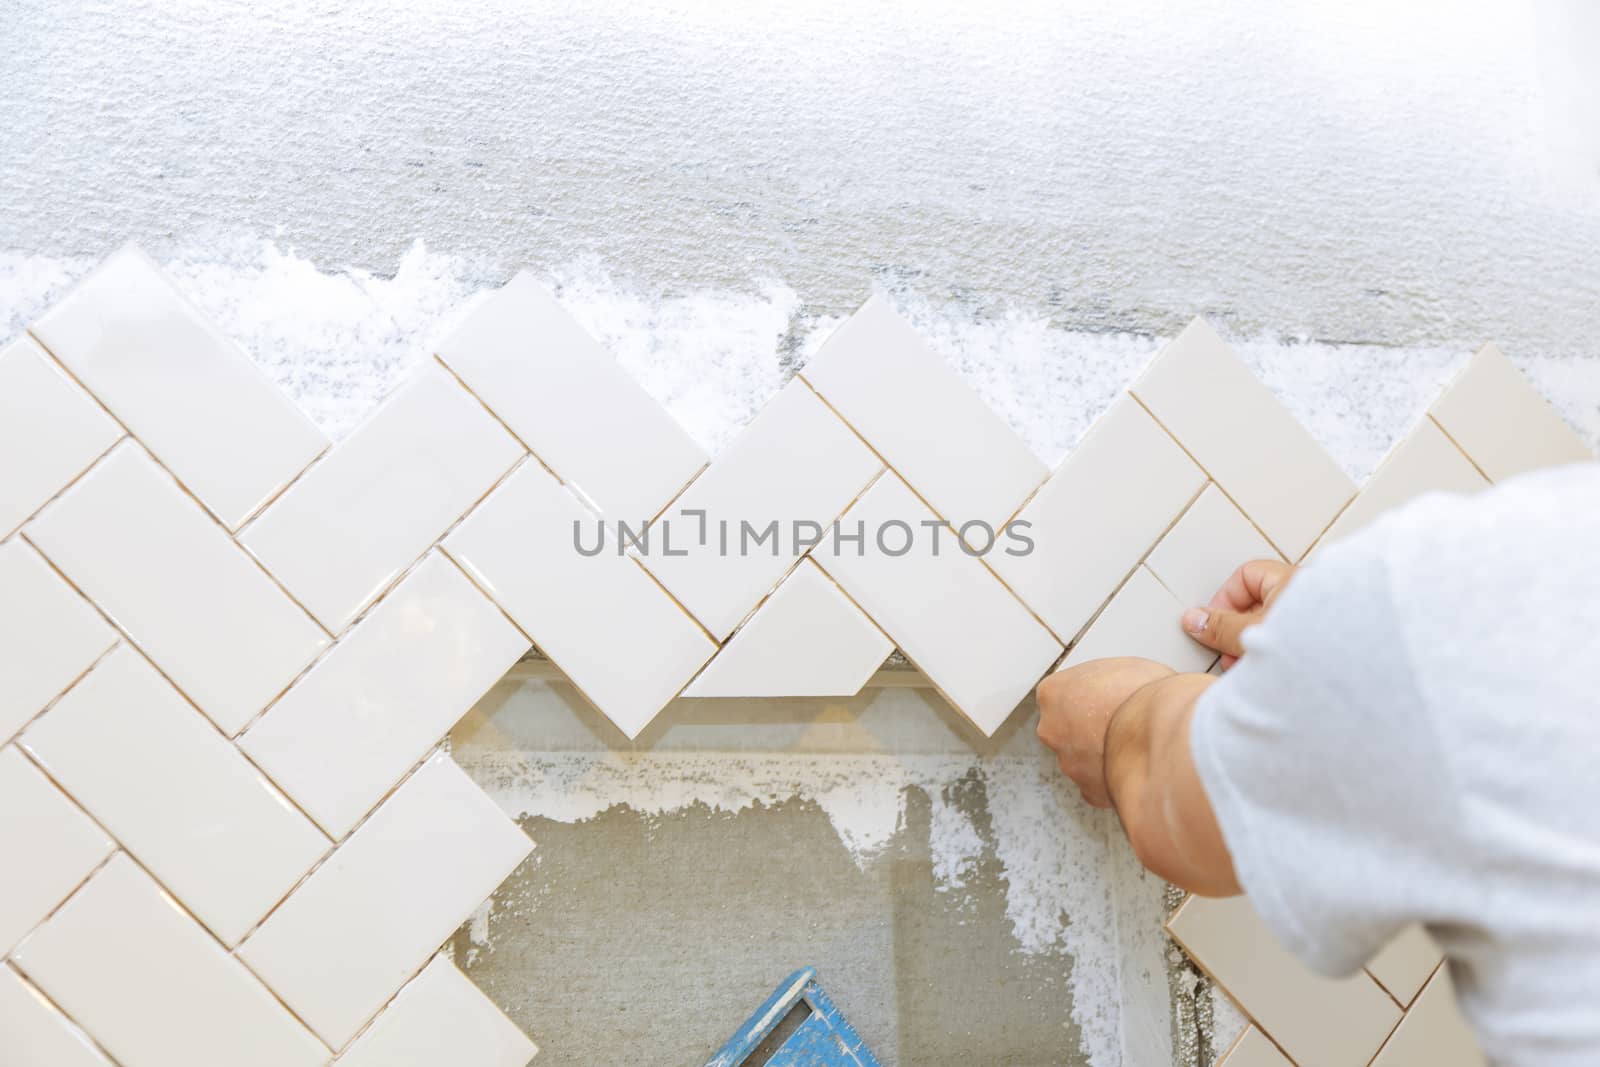 Troweling mortar into the hands of laying the tiles the ceramic tile